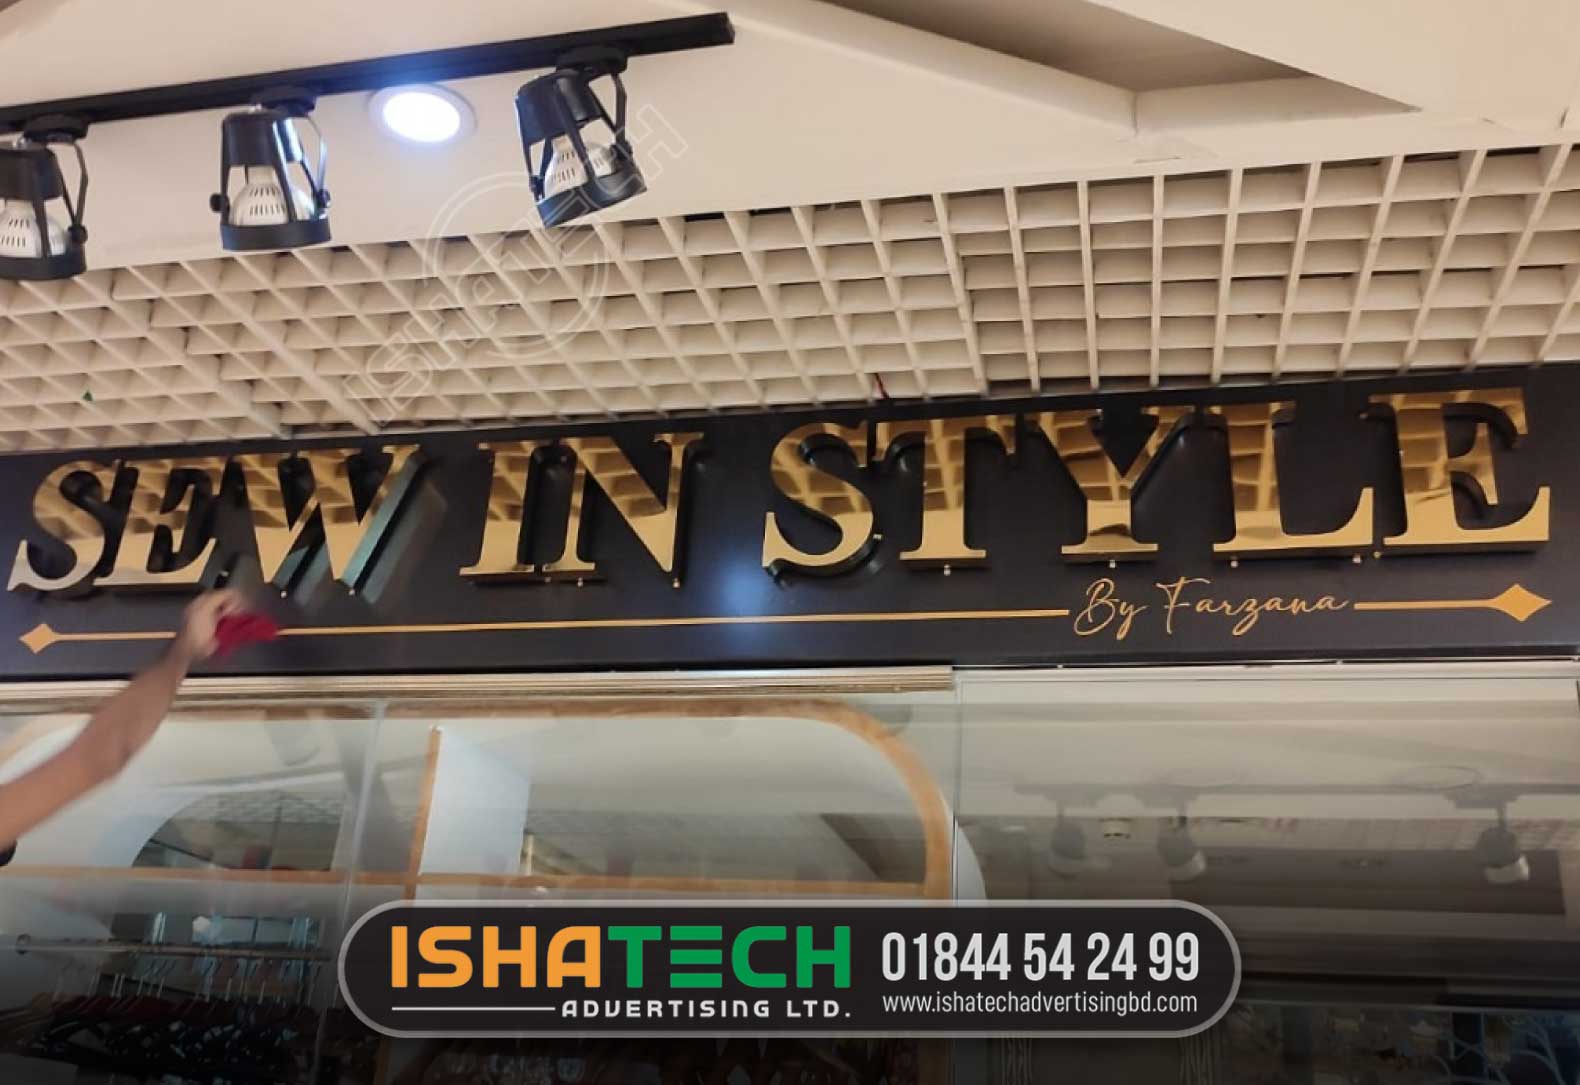 Best mirror letter maker dhaka. led sign bd. led sign board price in bangladesh. ishatech advertising ltd. sign board dhaka. led letter board. led display board suppliers in bangladesh. digital led sign board.